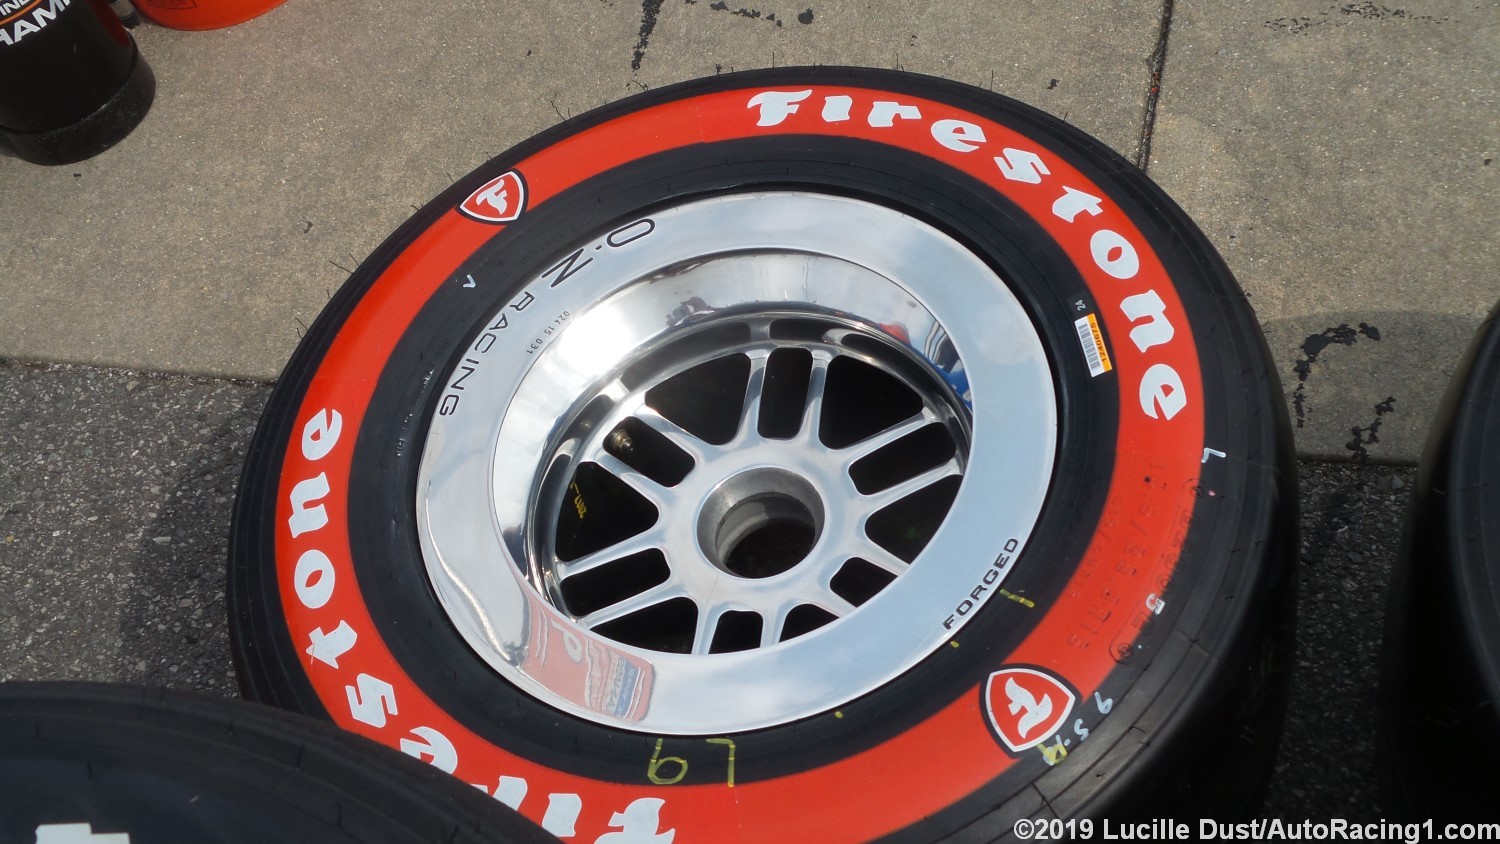 The Firestone Reds have been diabolical this weekend